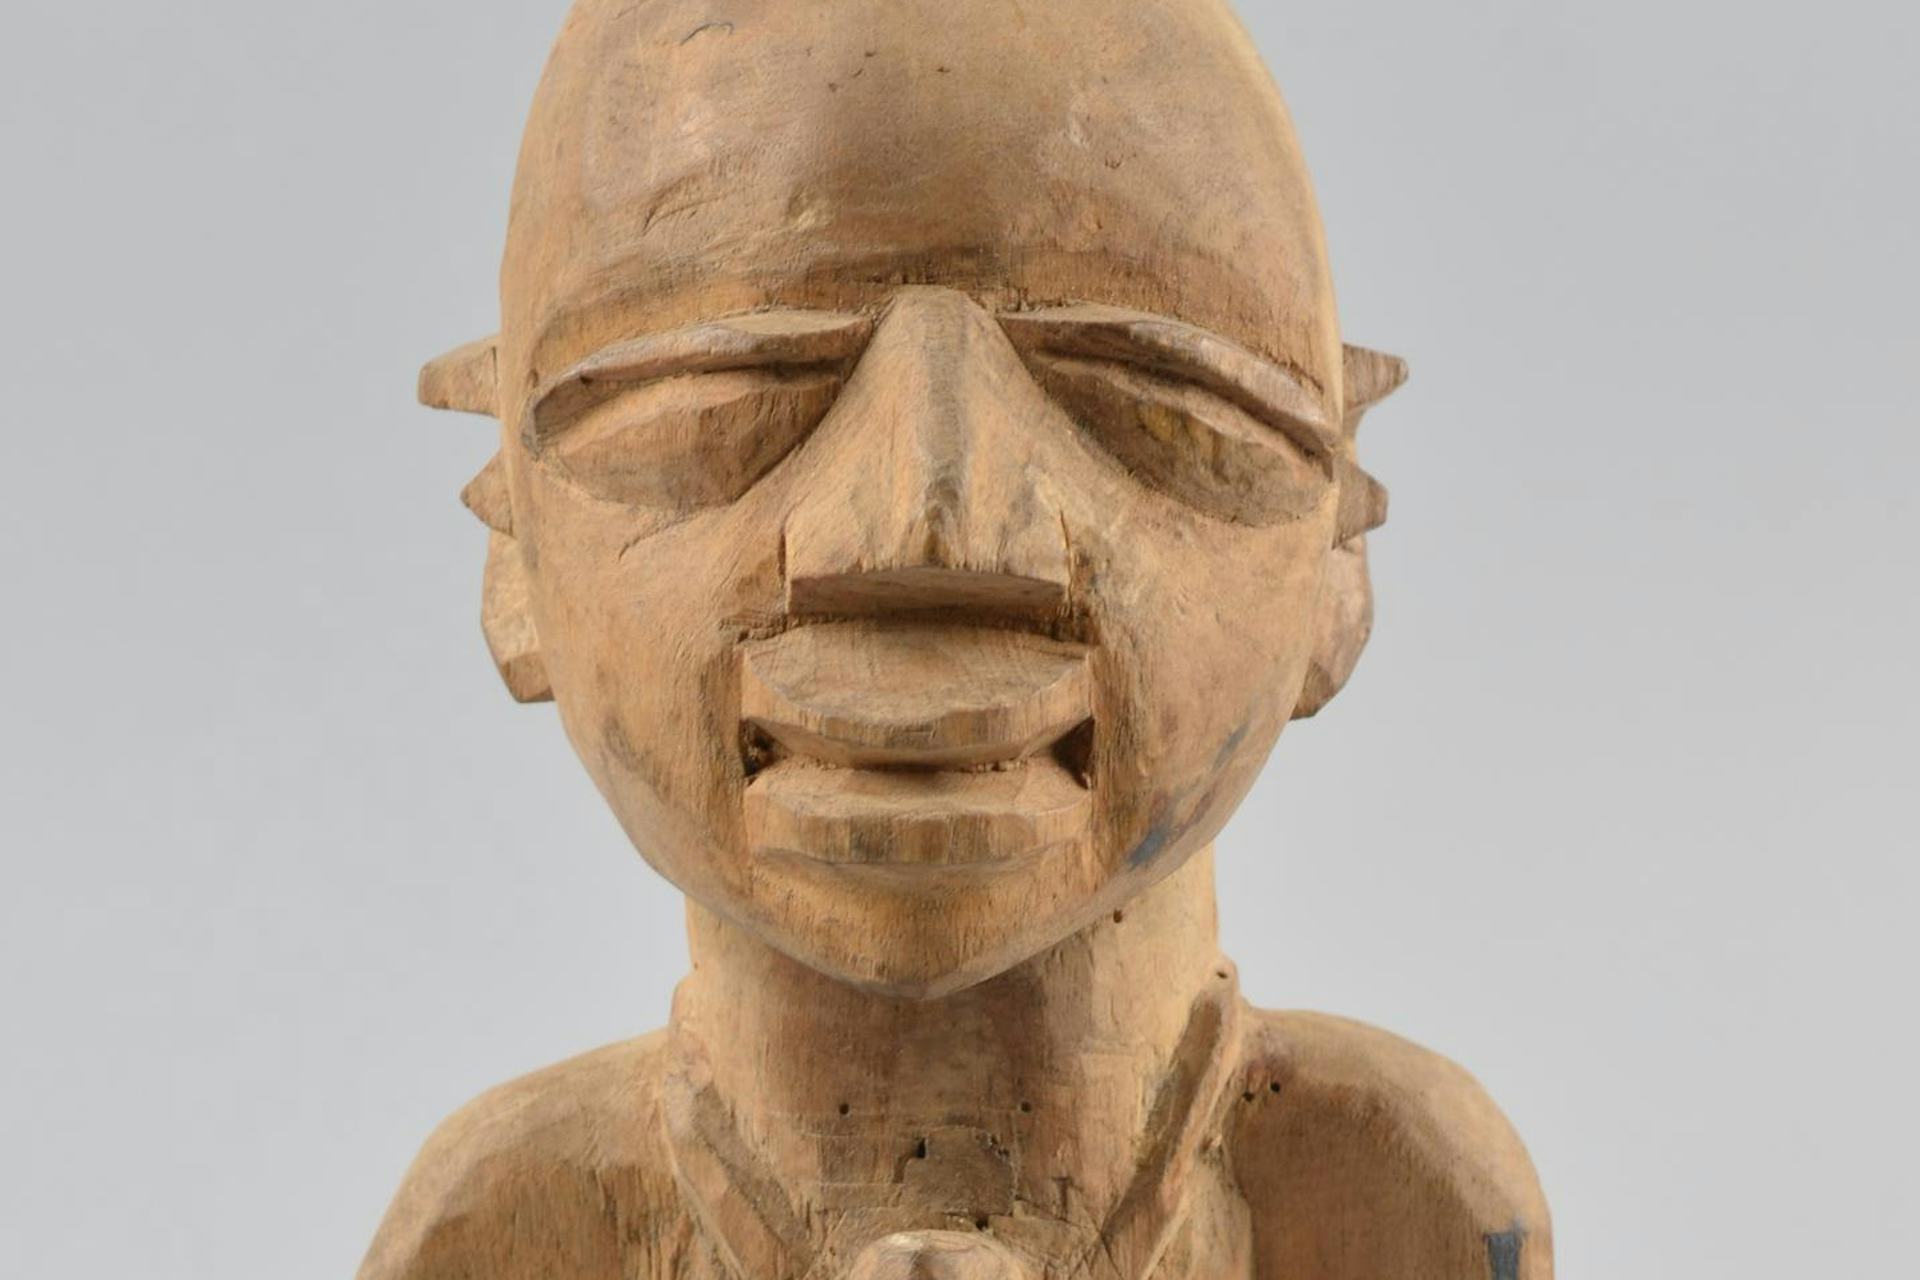 Wooden figure from Osanyin shrine, by Biro (1959).